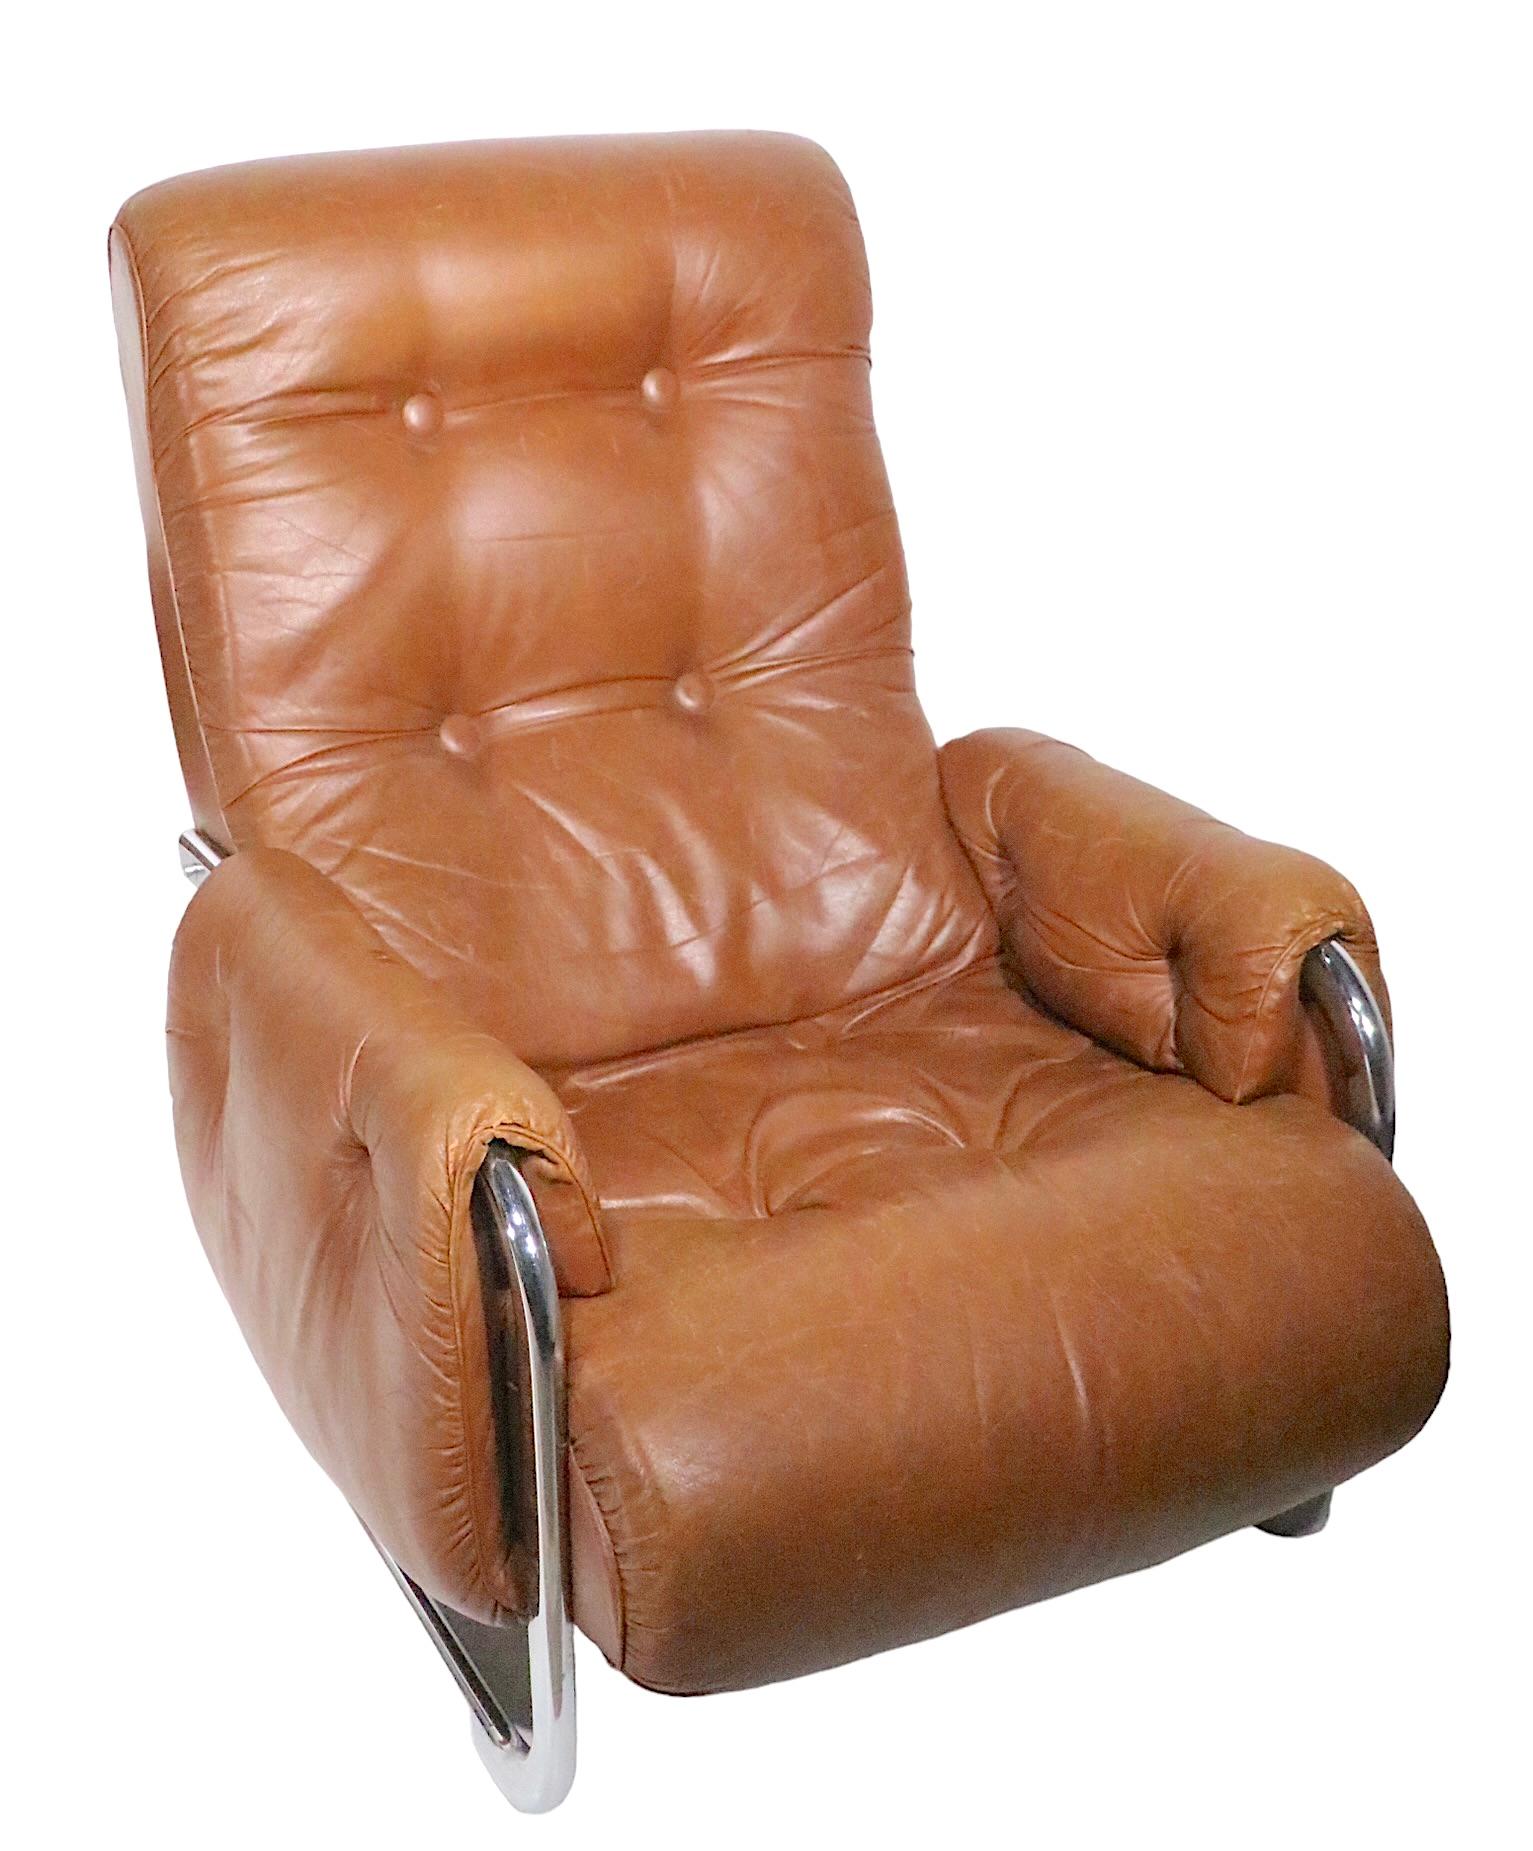 Chic Post Modern low lounge chair and ottoman, in brown baseball mitt leather, with a bright chrome frame. The chair and ottoman have cantilevered bases, adding to the architectural style of the design. This example is in good, original, ready to